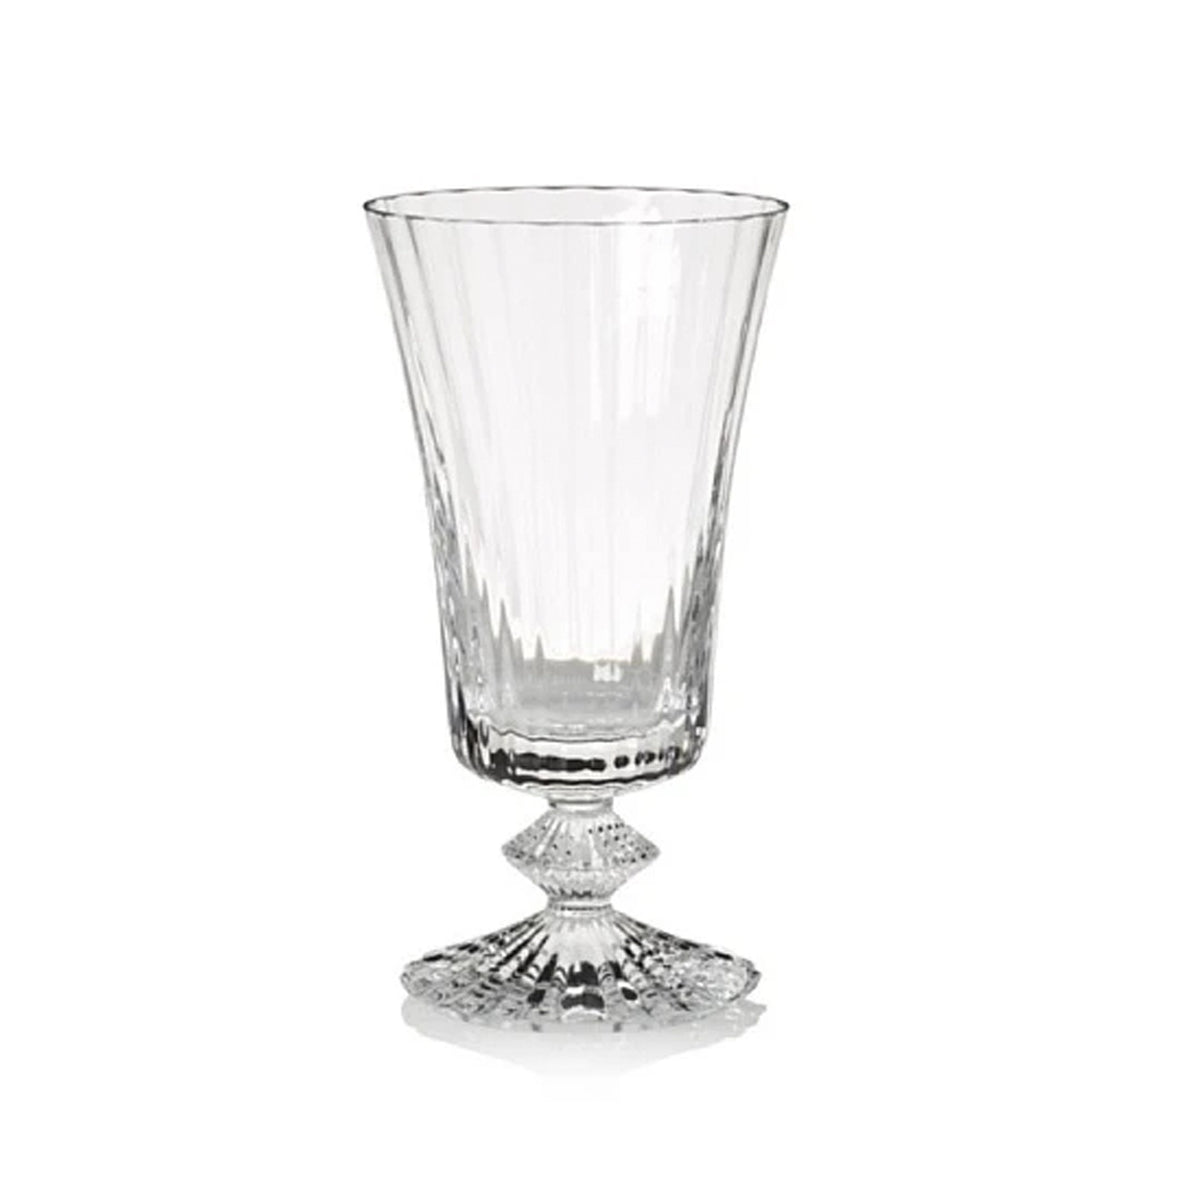 Mille Nuits White Wine Glass